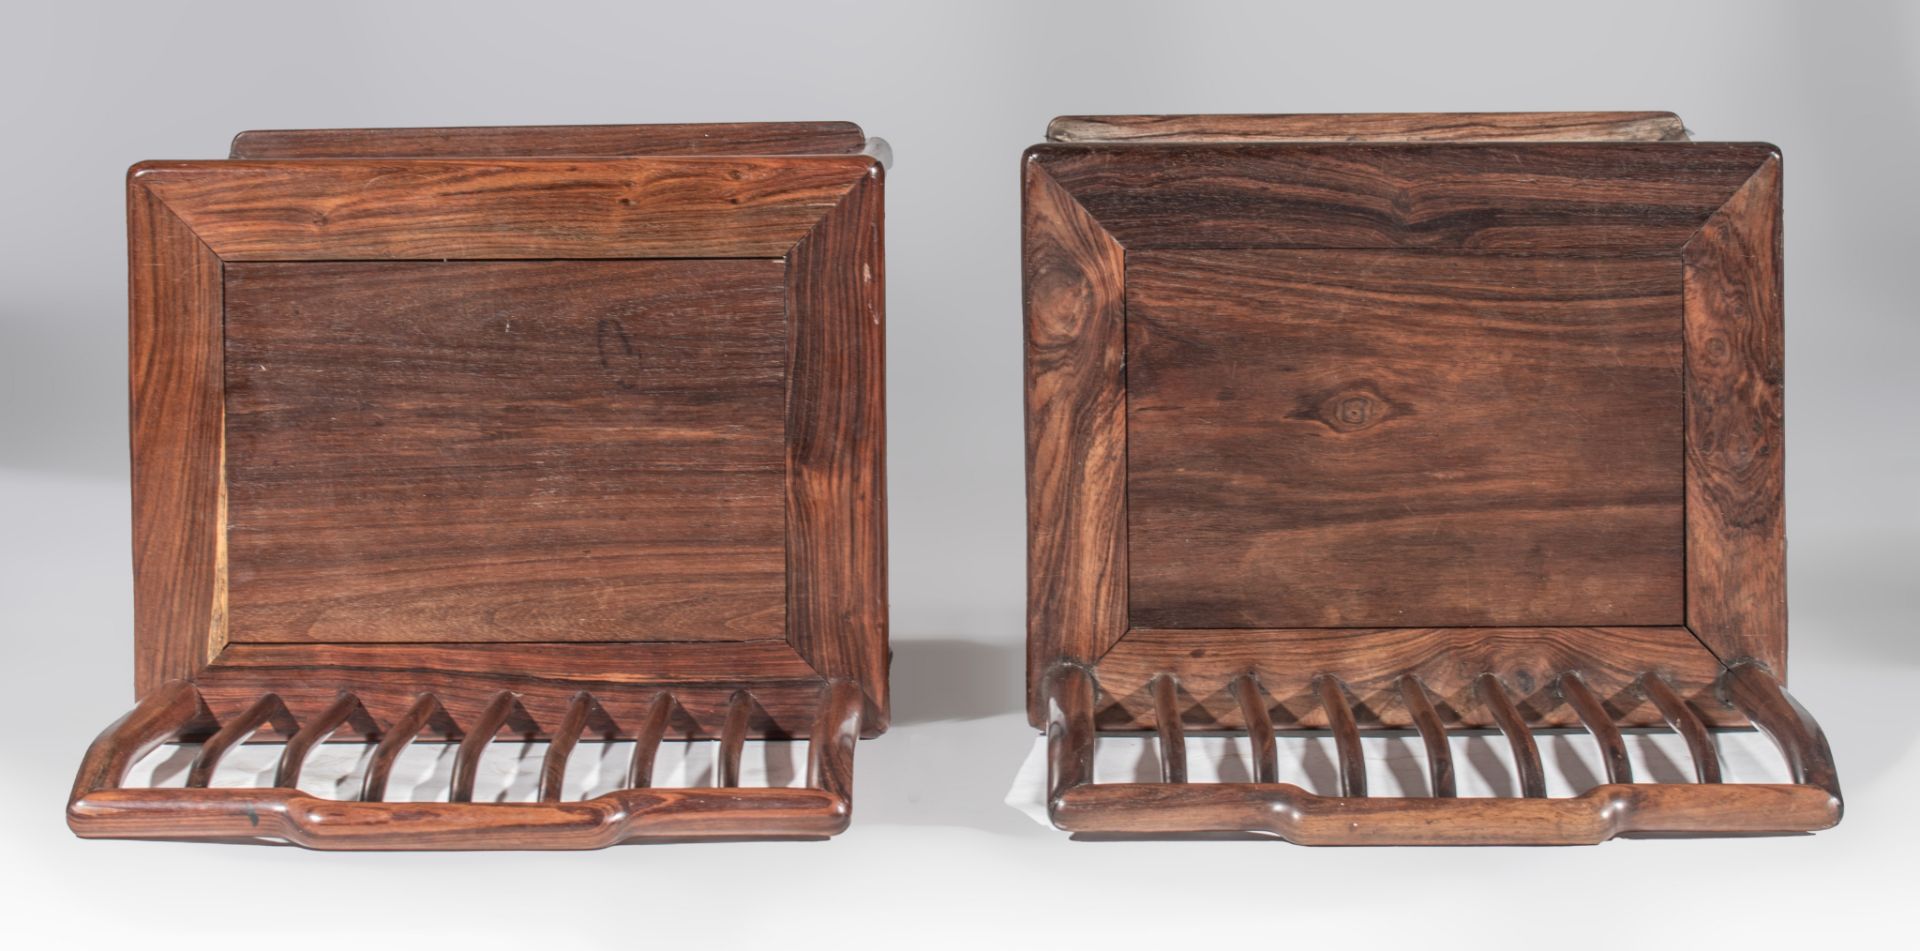 A pair of Chinese hardwood spindle back chairs, Republic period, H 92 - W 52,5 - D 40 cm - Image 7 of 8